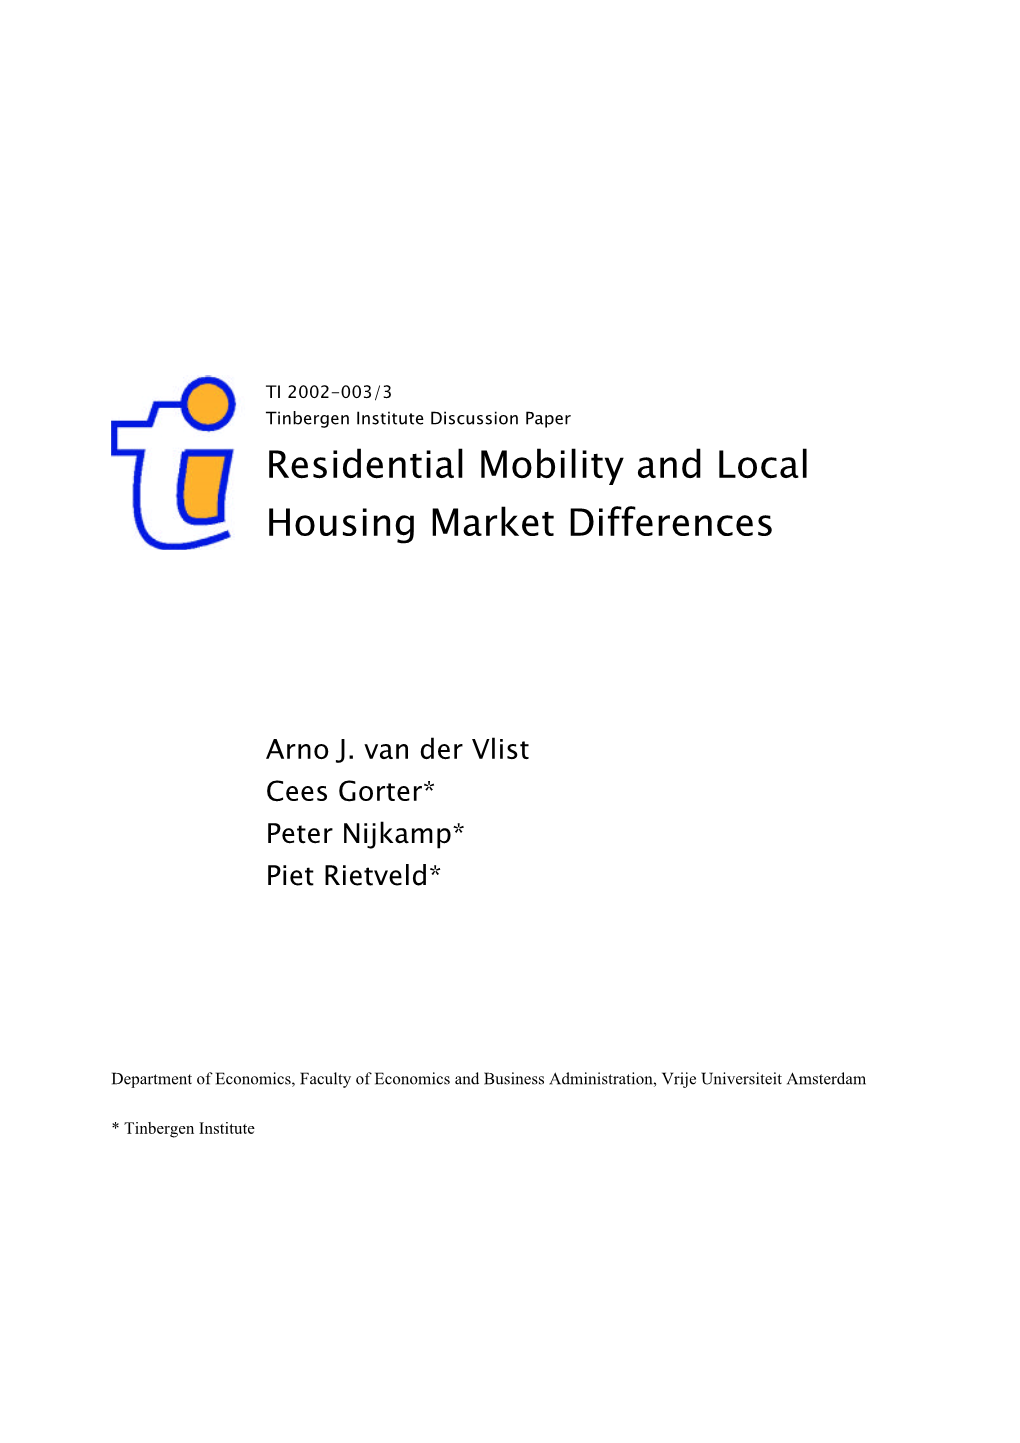 Residential Mobility and Local Housing Market Differences